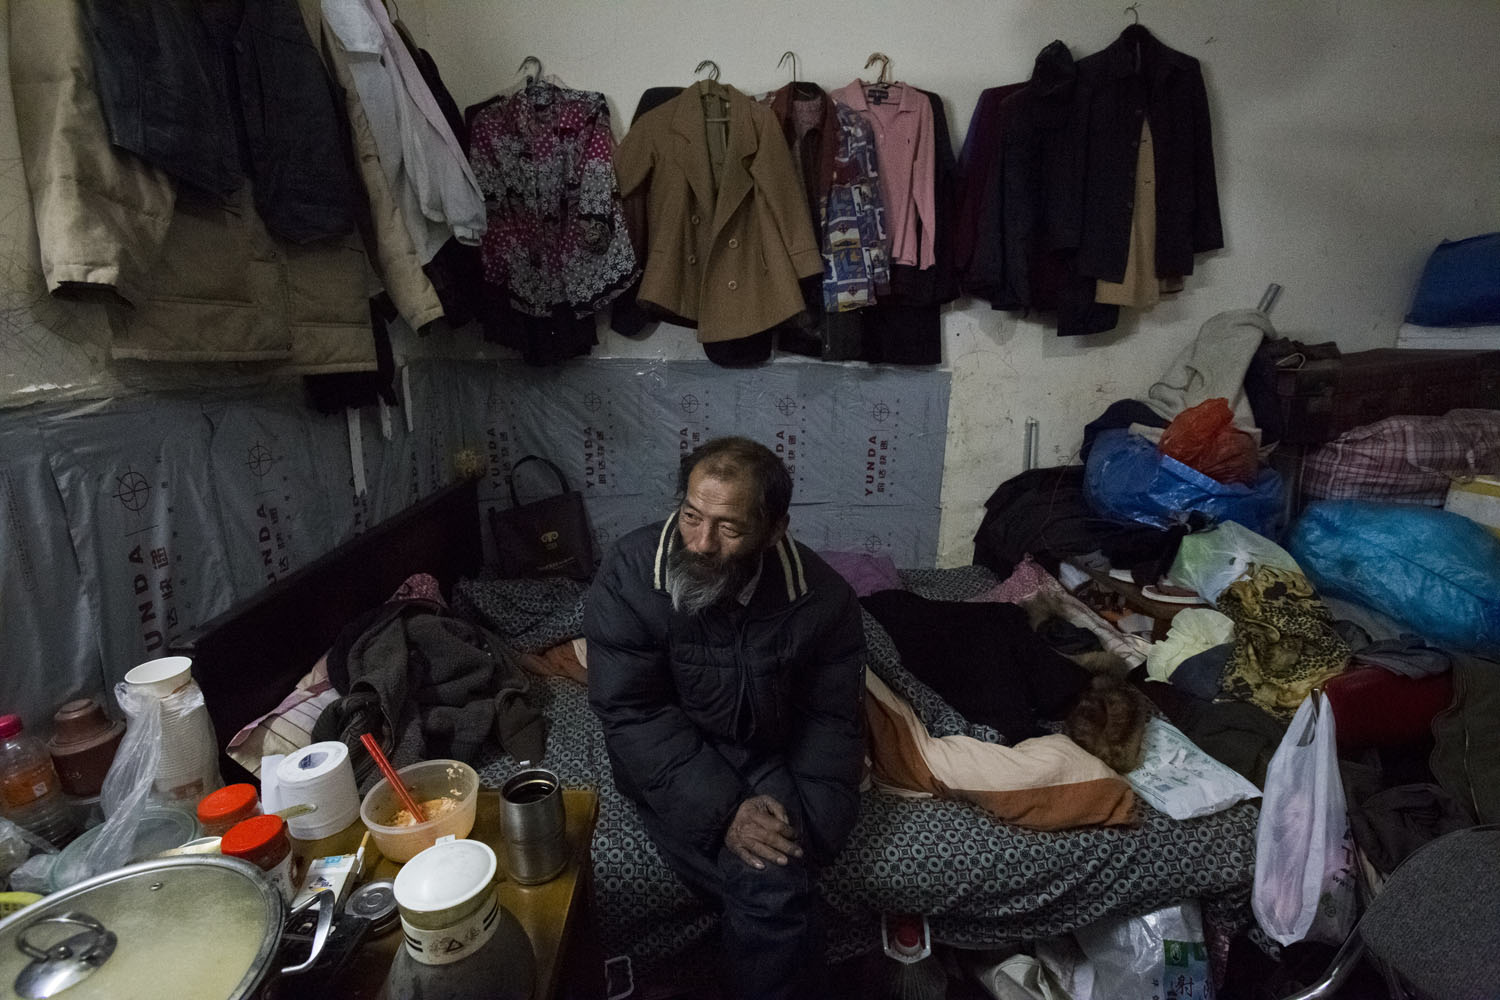 A man sits for a portrait after dinner in the rented rooms that he shares with his wife. Guangfu Road. Shanghai, China. 2016.